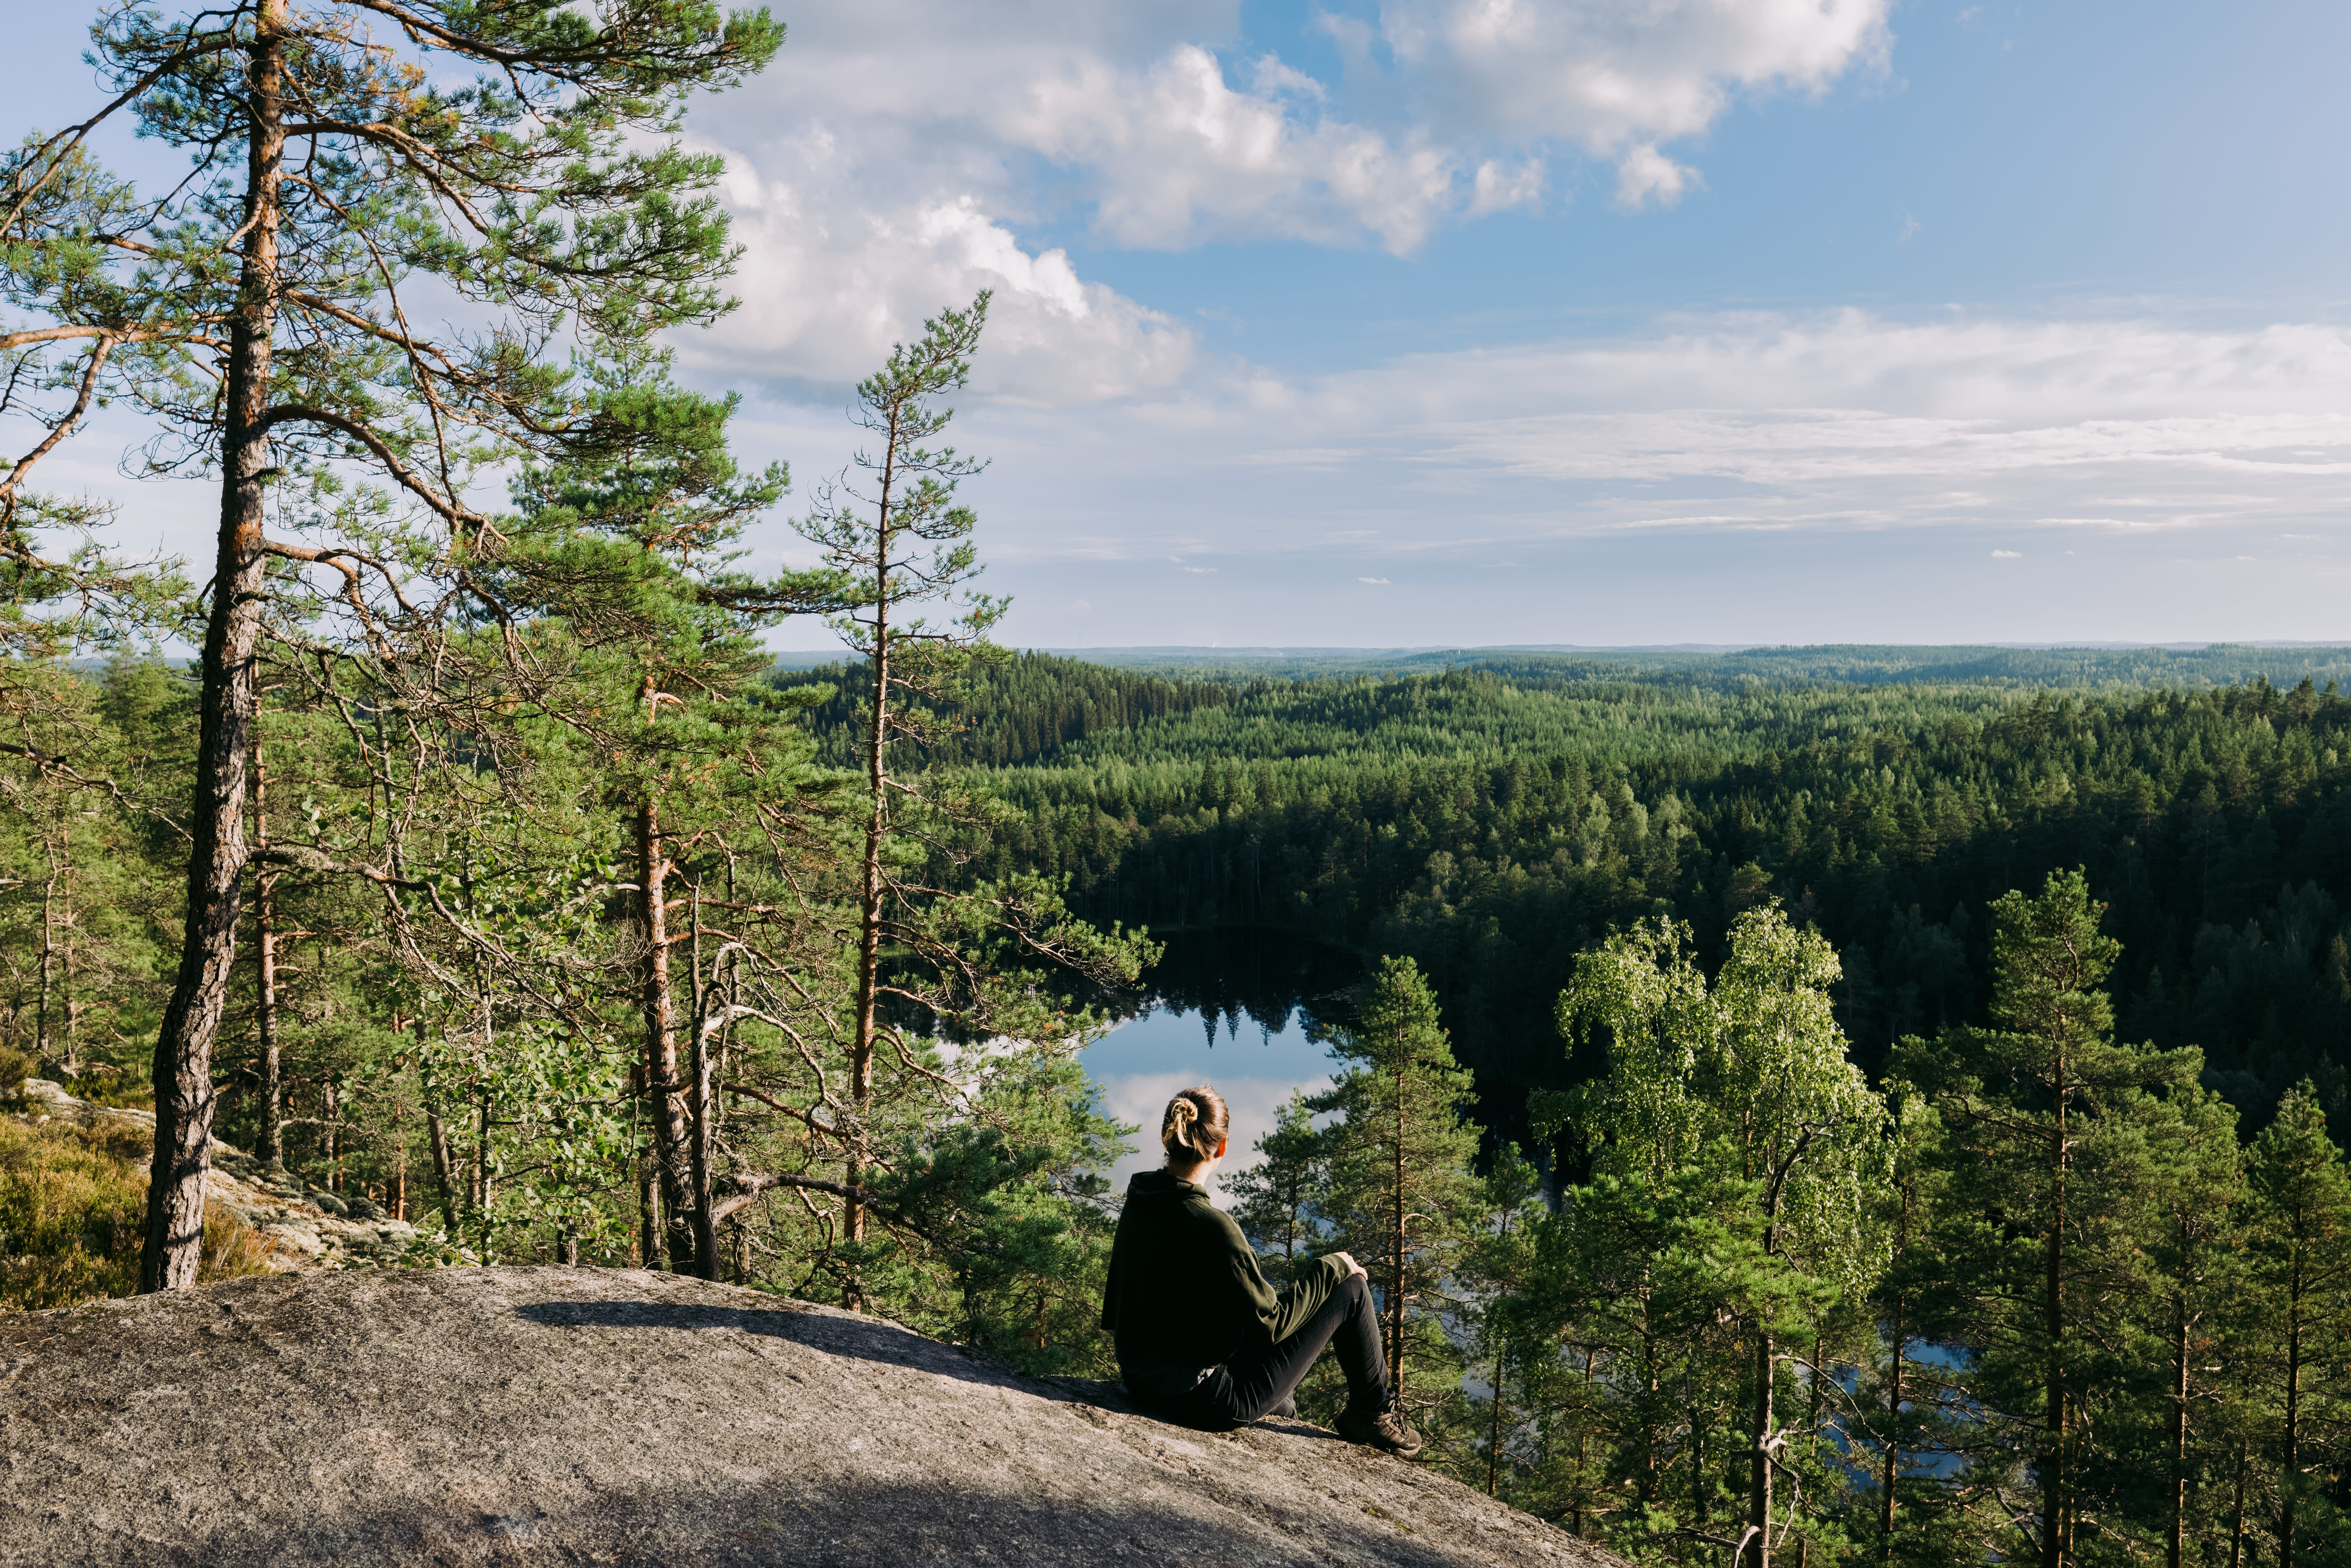 Record numbers will visit Finnish national parks in 2021